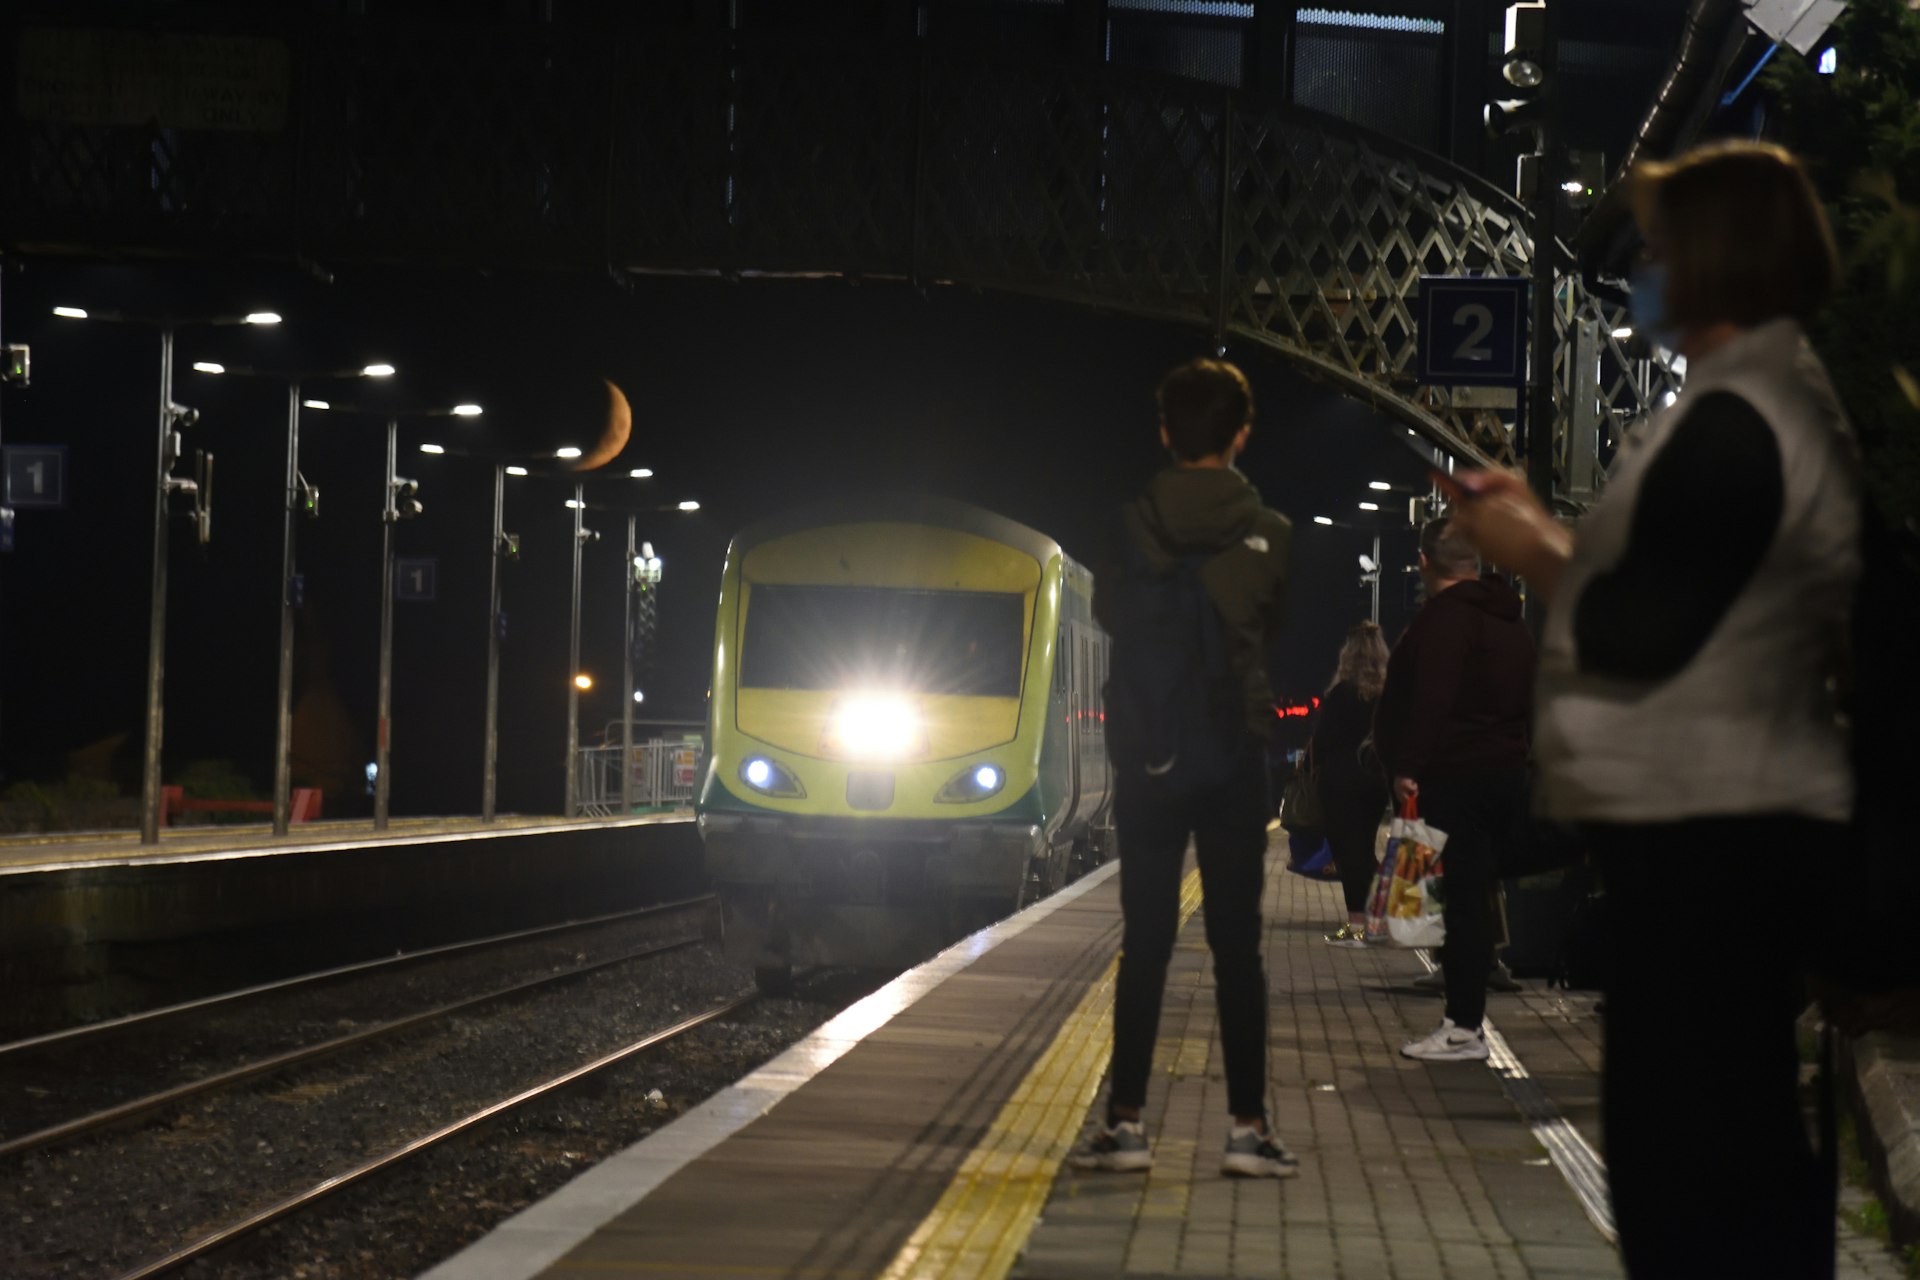 A busy train platform in the evening